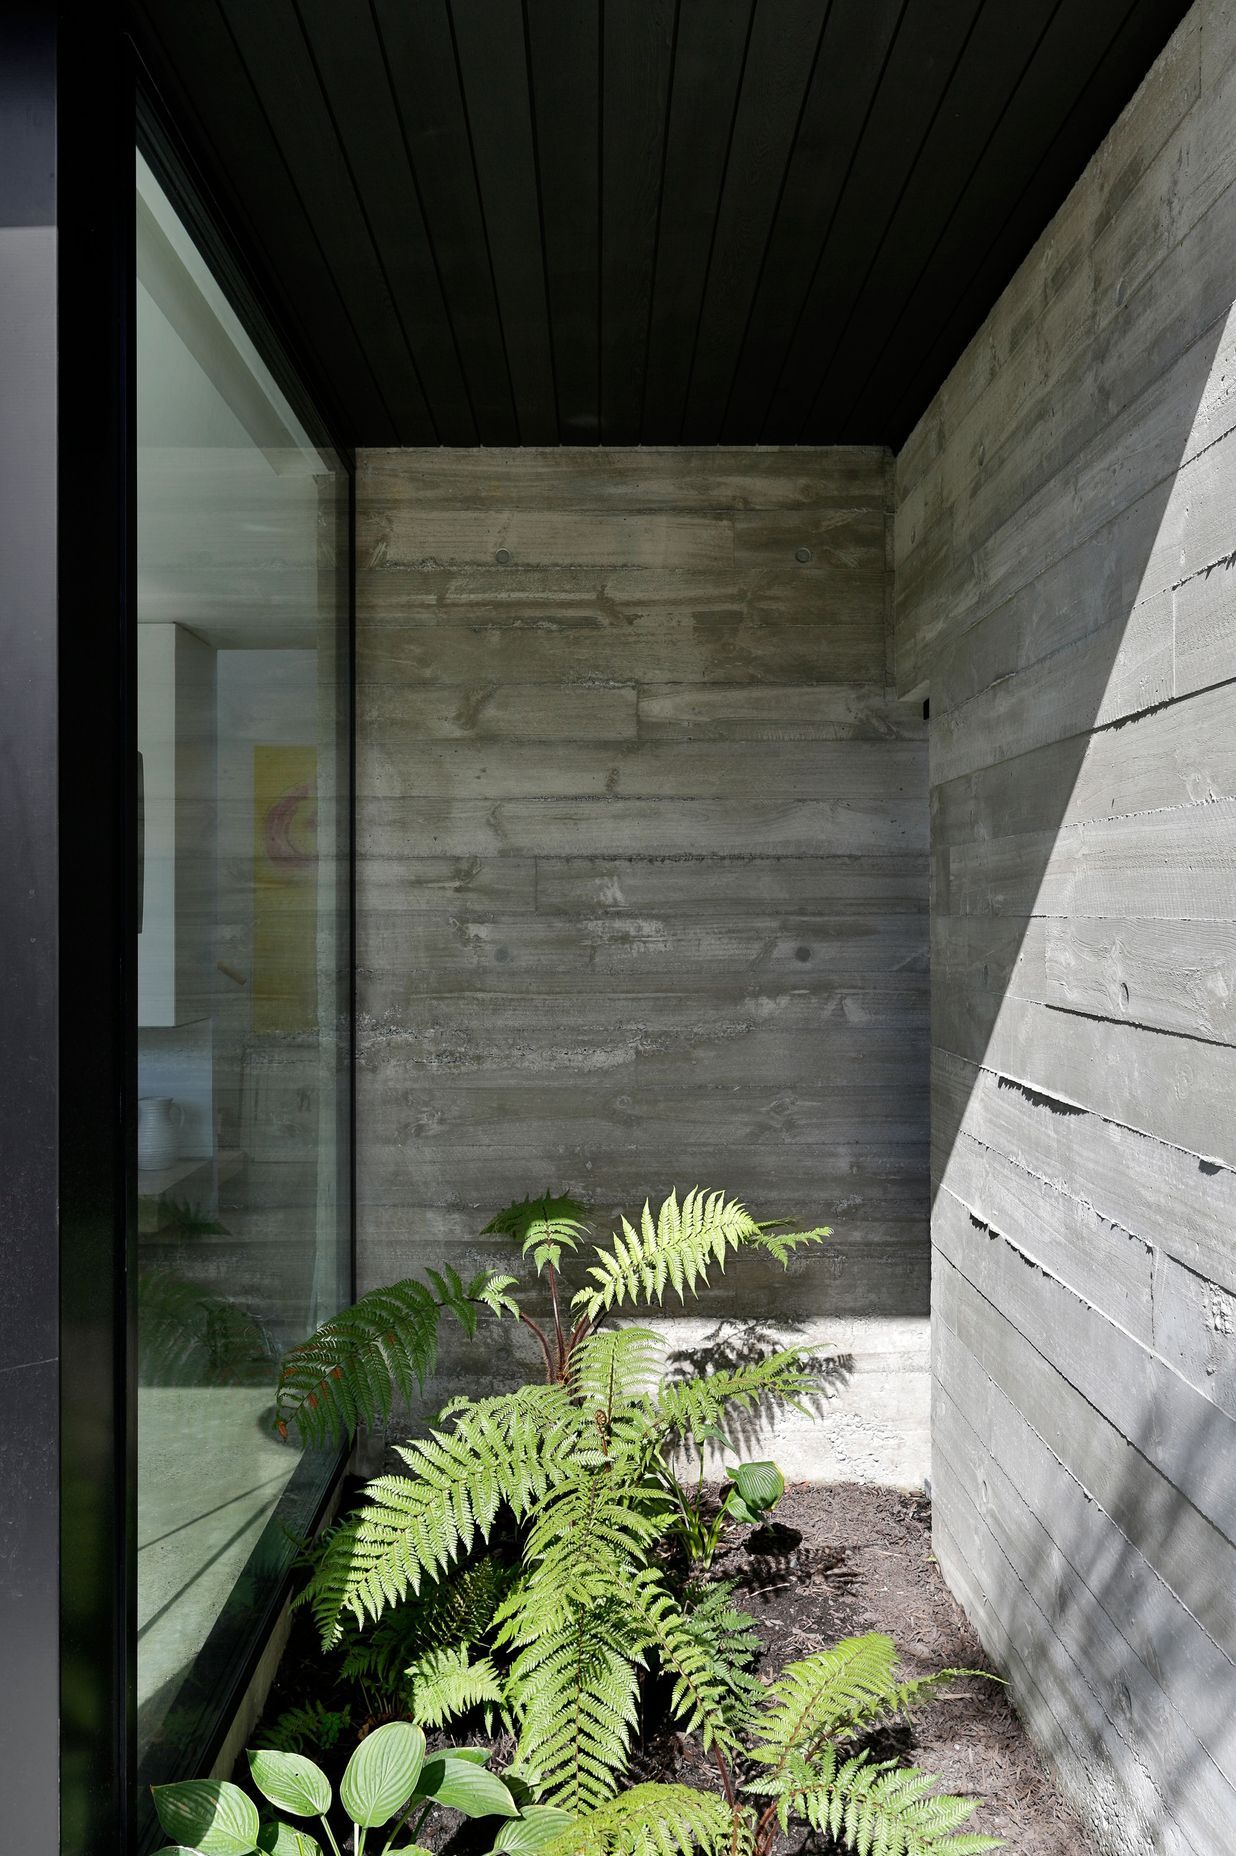 Rough-sawn timber shuttering creates textured walls that ooze out at the edges.